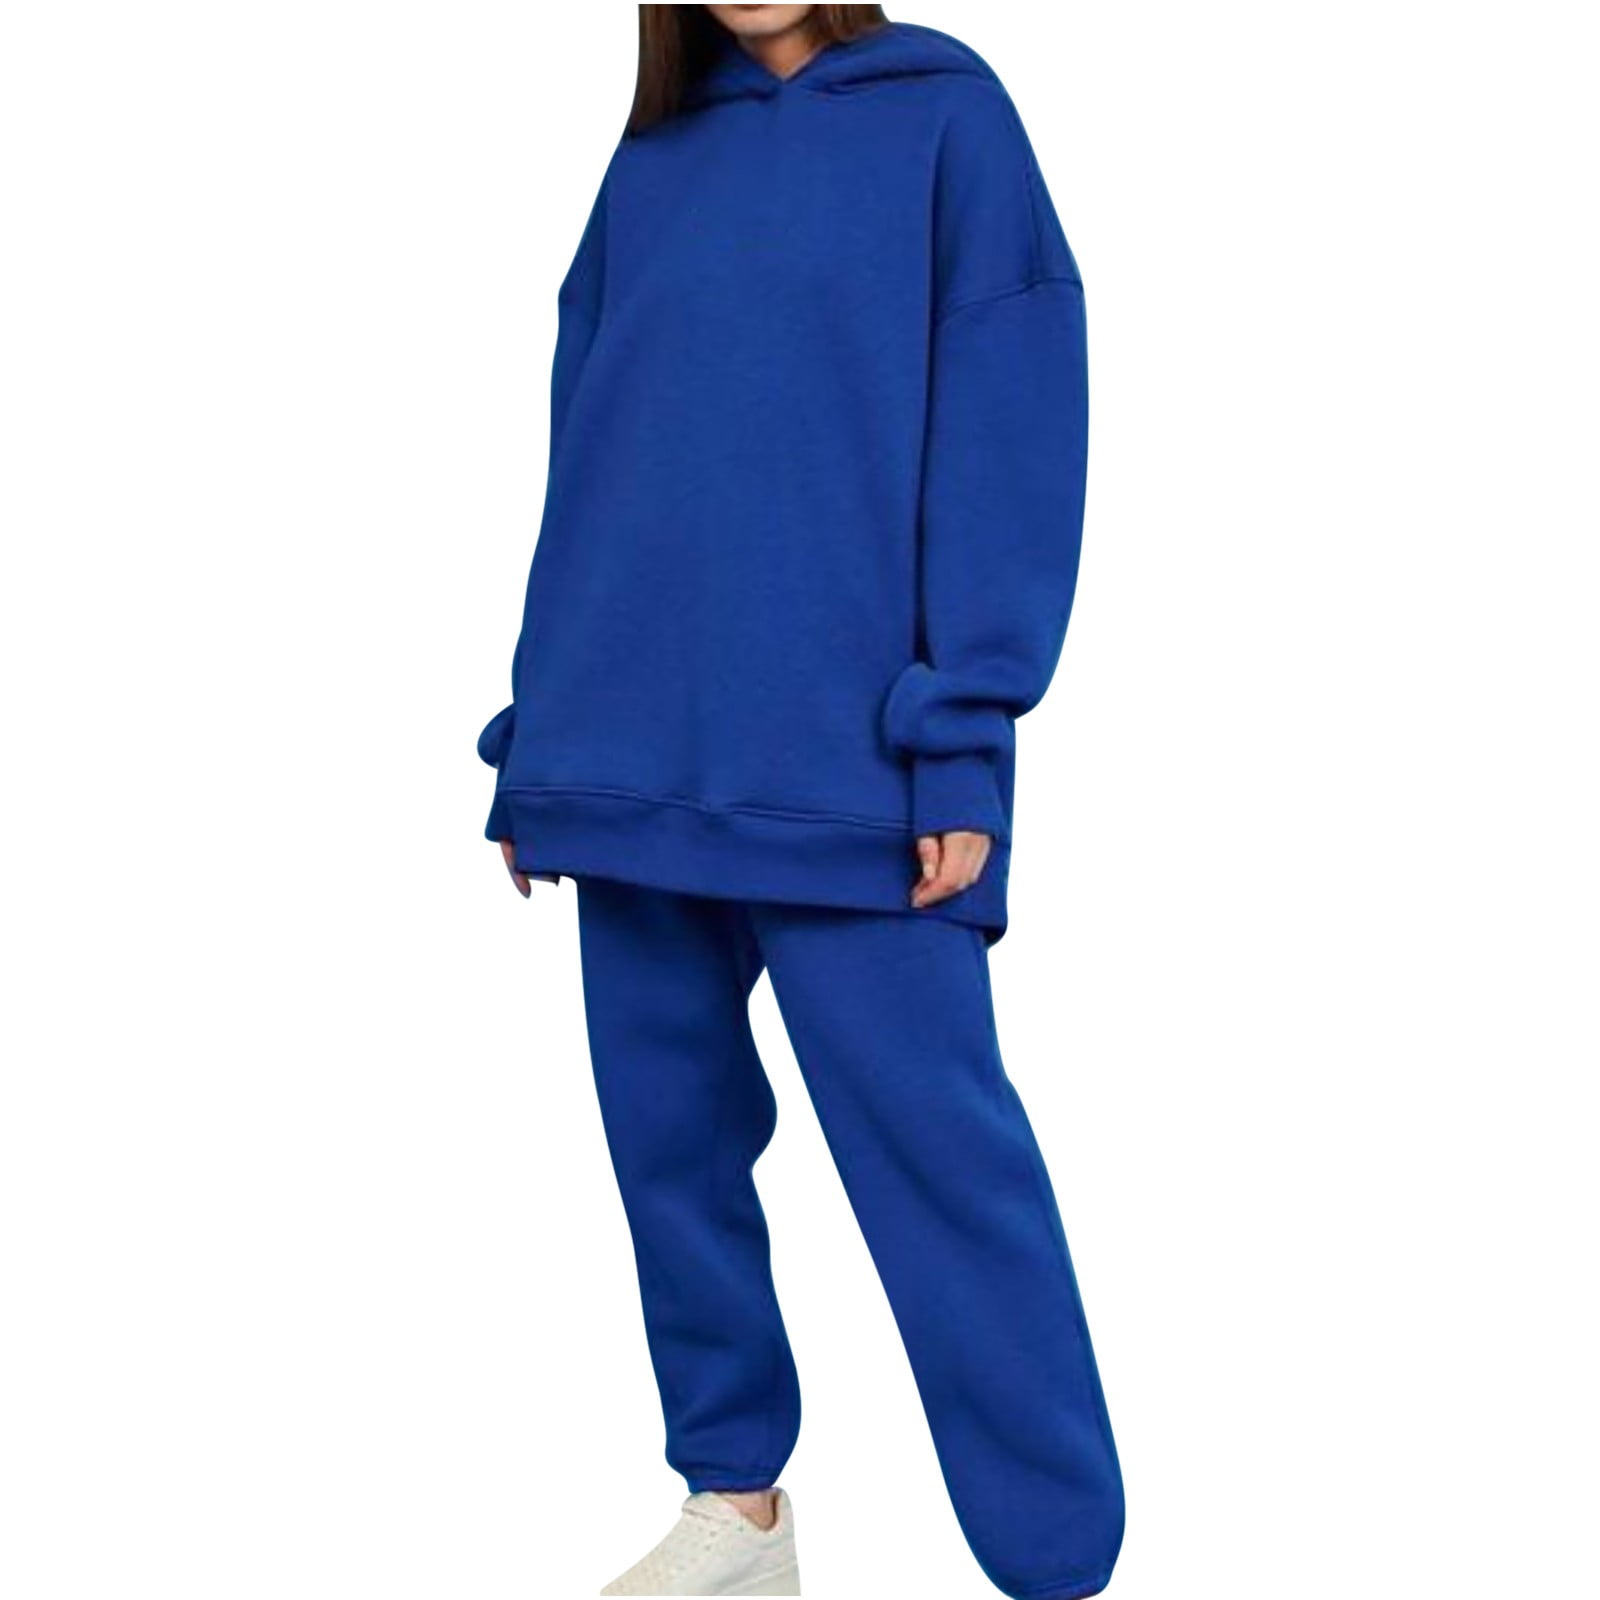 2 Piece Jogging Sets Womens Pocketed Hoodie Sweatshirt and Sweatpants ...